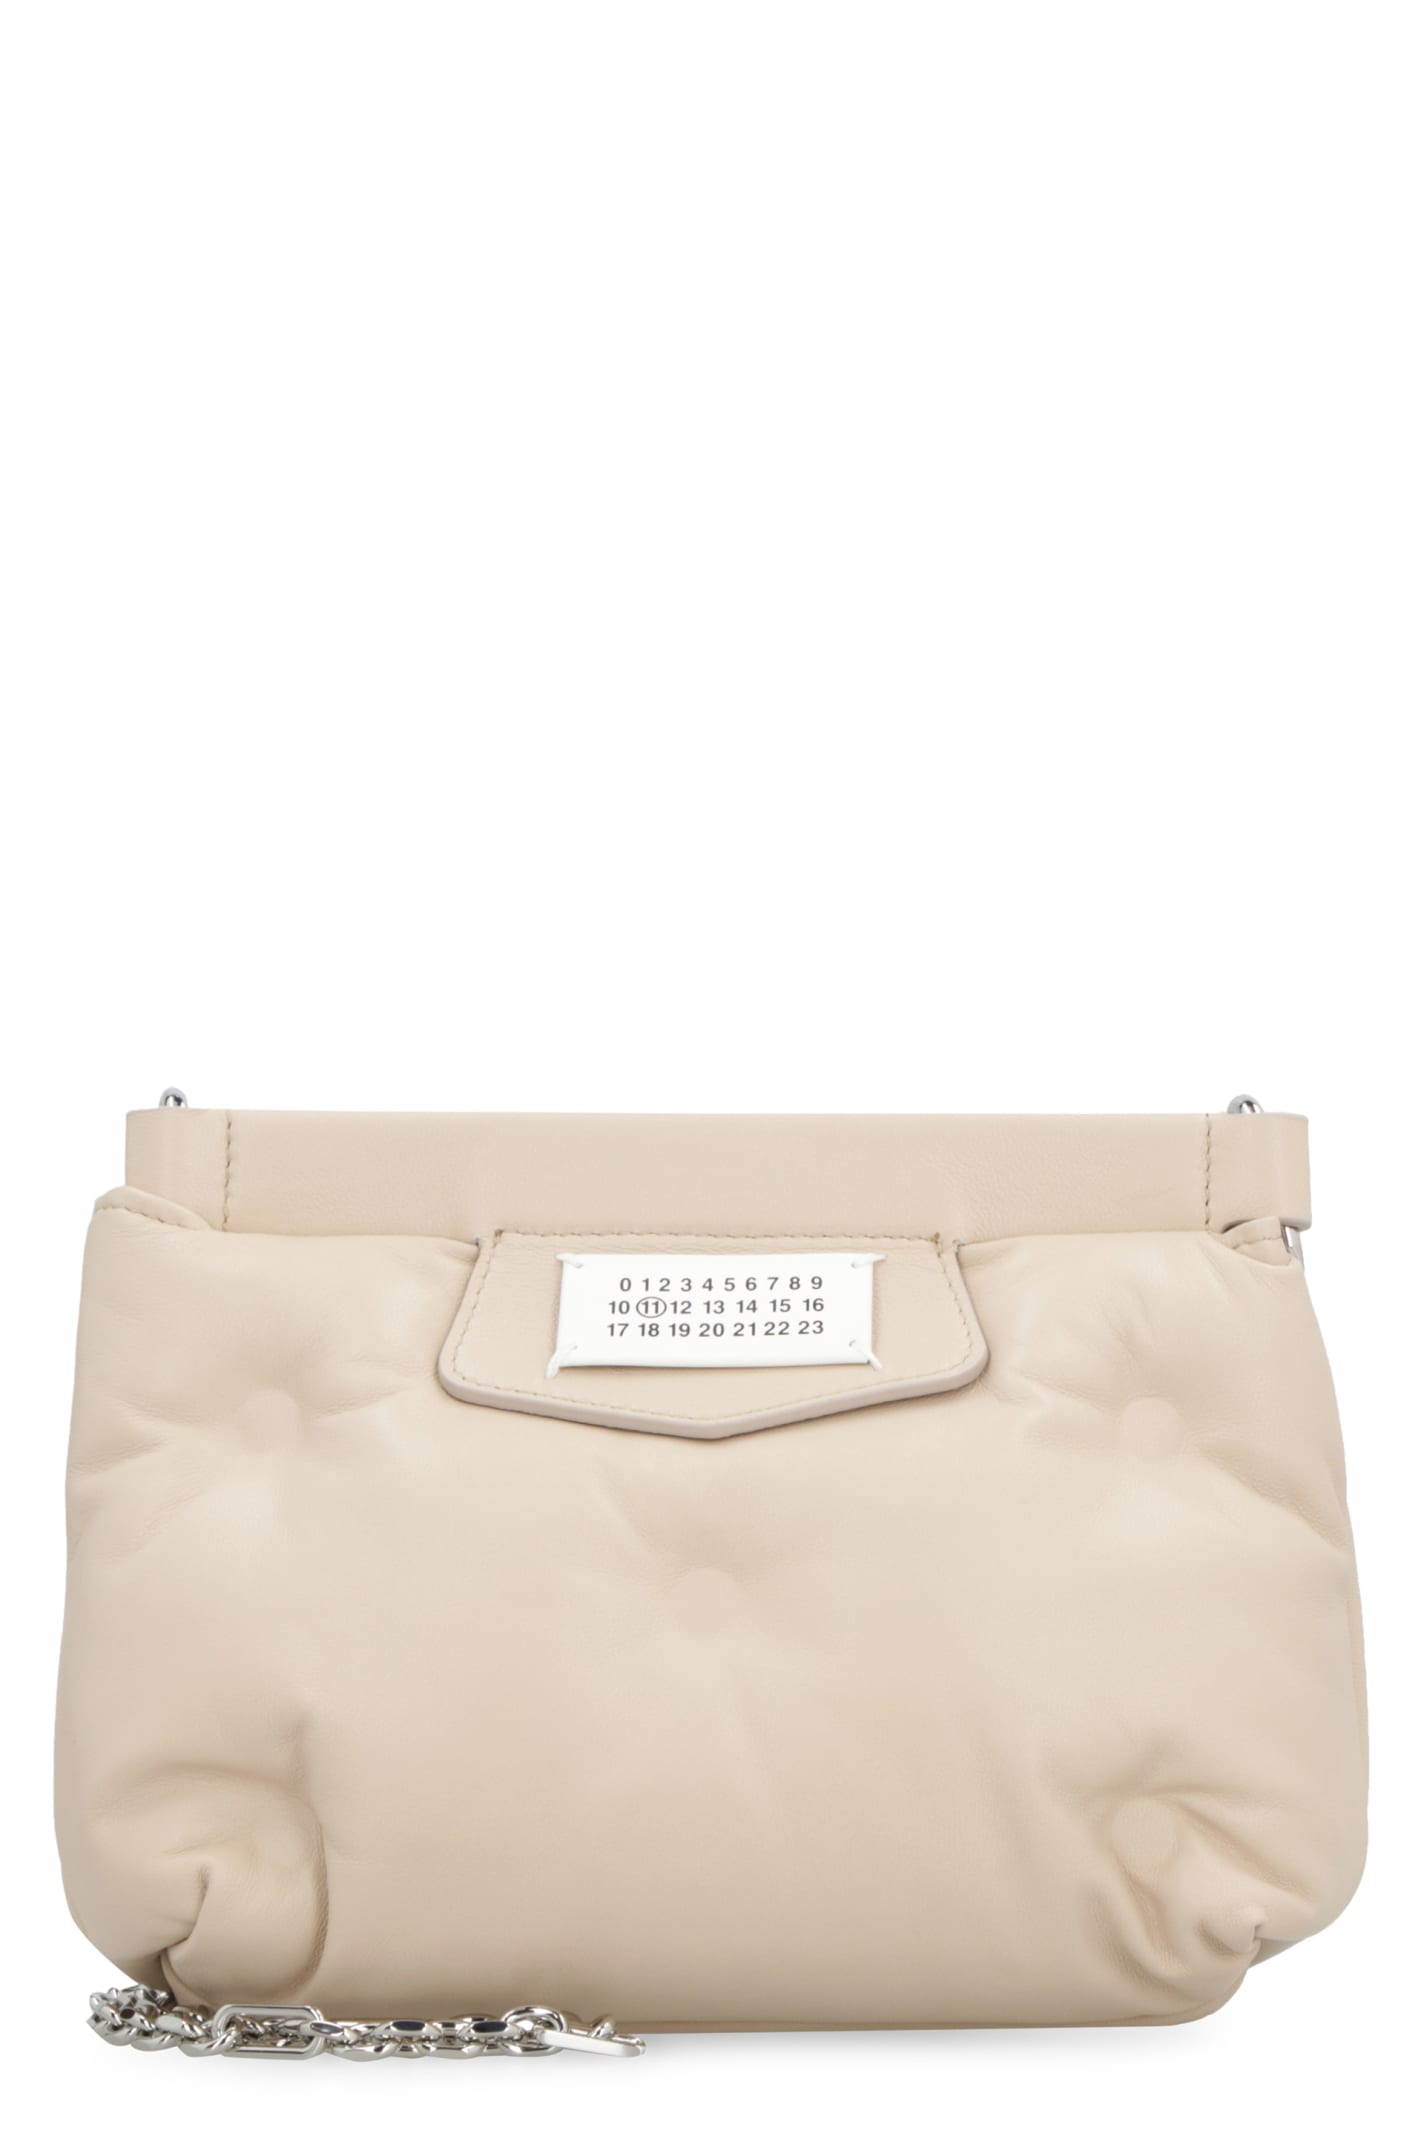 Maison Margiela Glam Slam Leather Clutch In Pale Pink